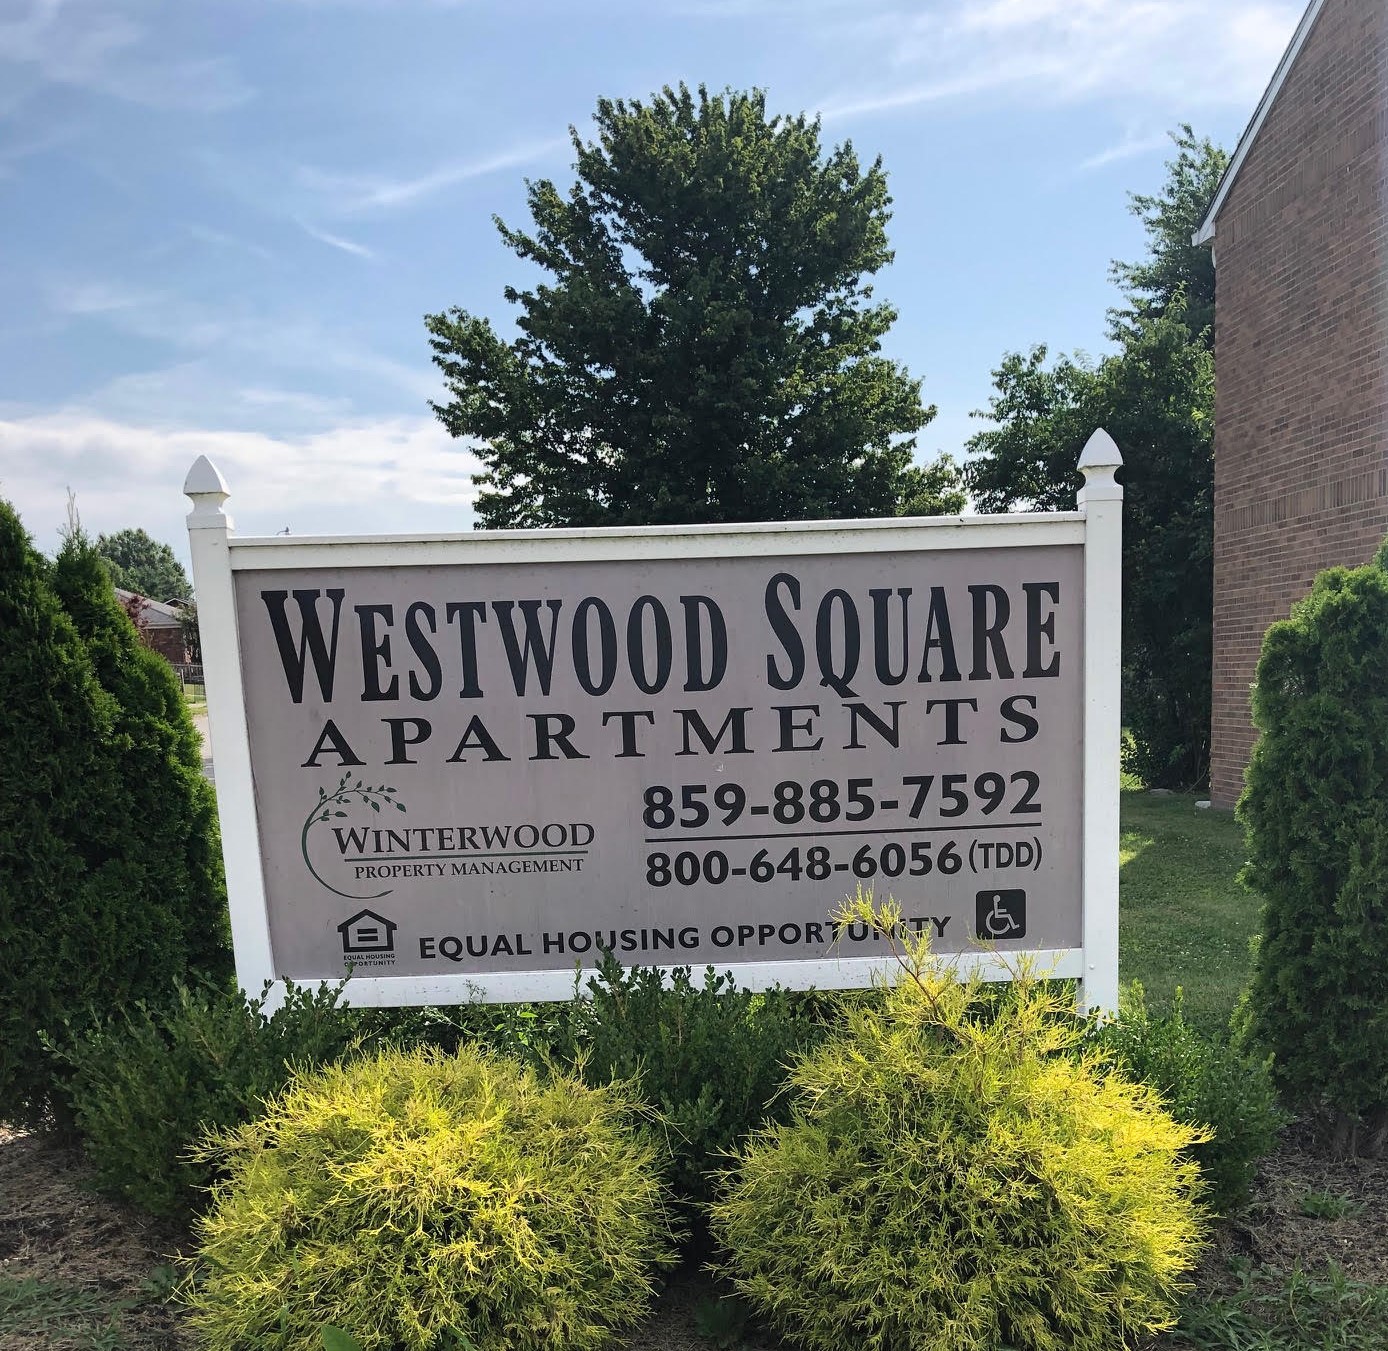 WESTWOOD SQUARE APARTMENTS